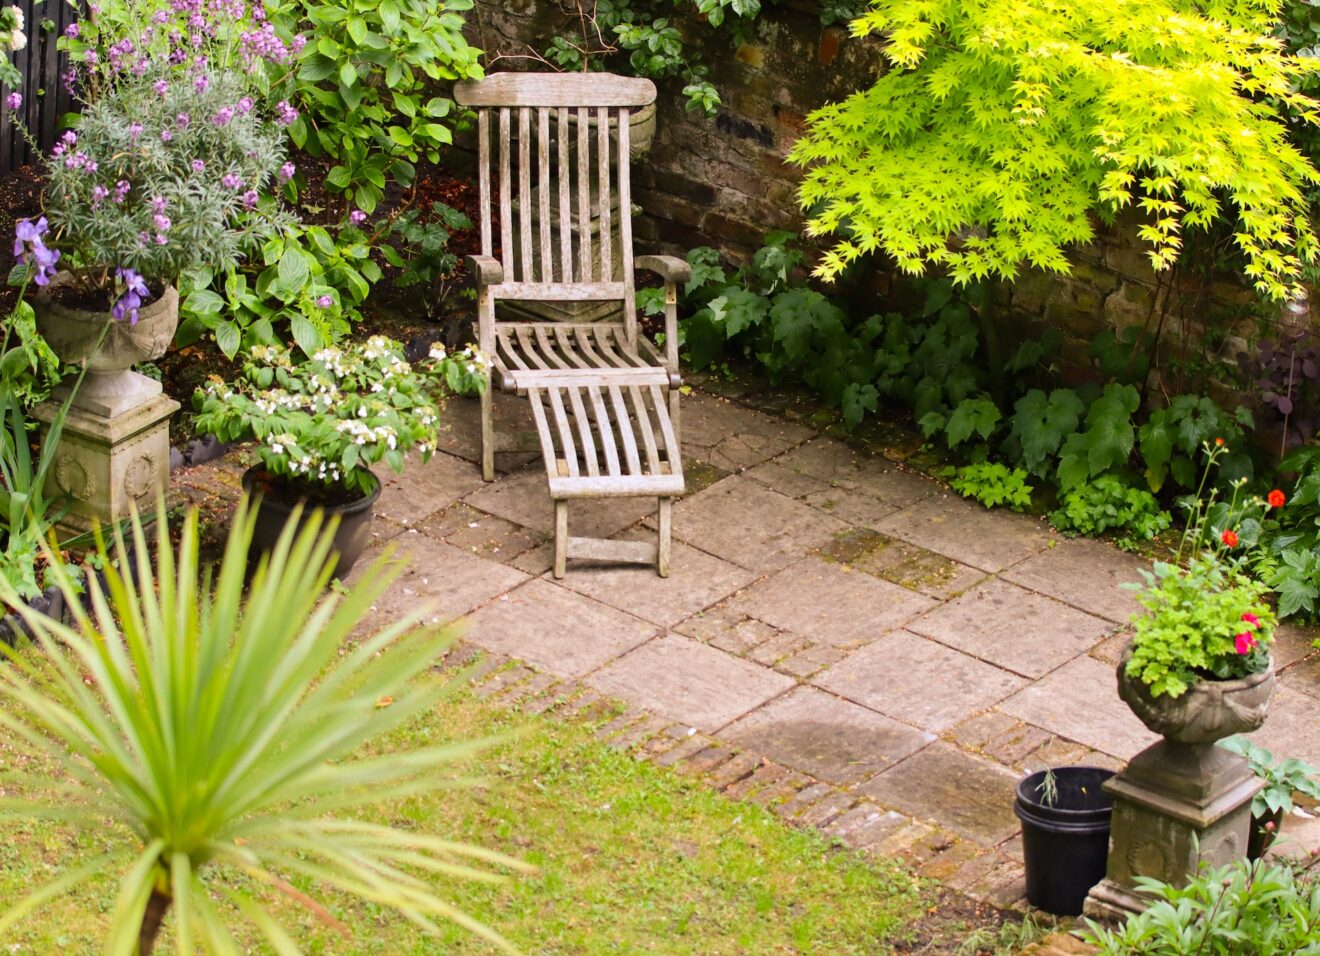 Ideas to transform your outside space into a City oasis for calm and relaxation